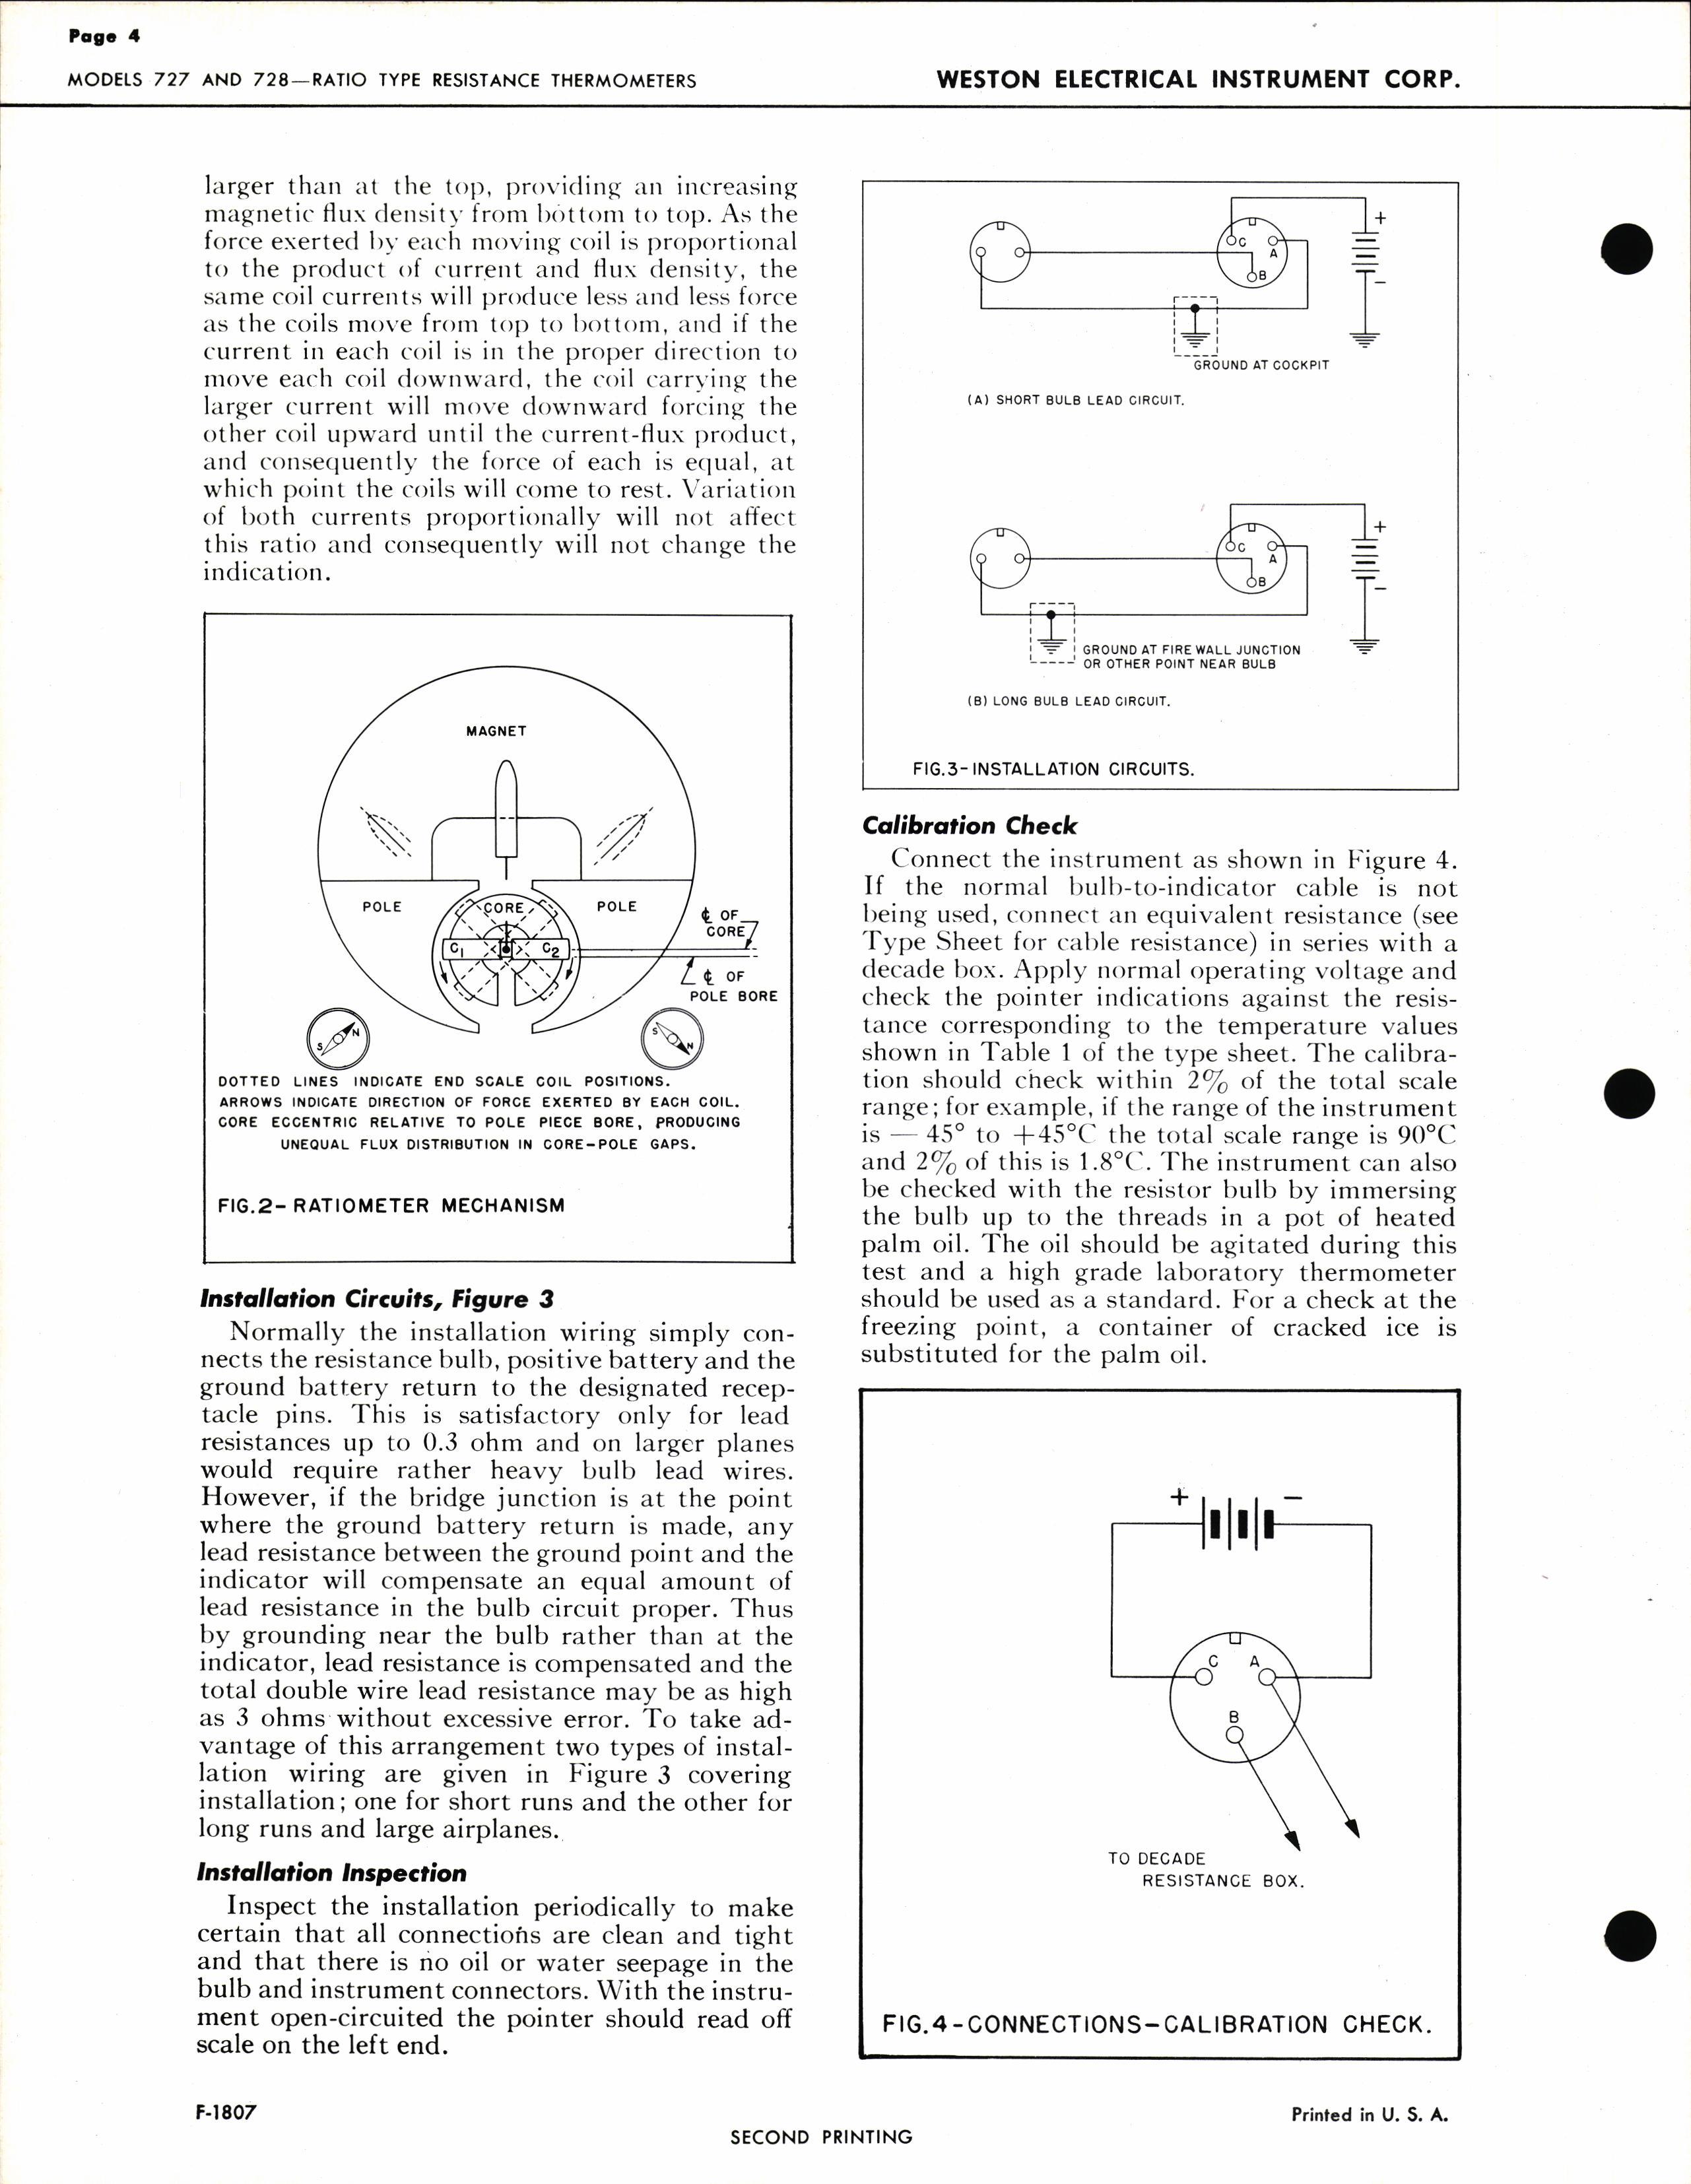 Sample page 4 from AirCorps Library document: Service Instructions for Models 727 & 728 Ratio Type Resistance Thermometers